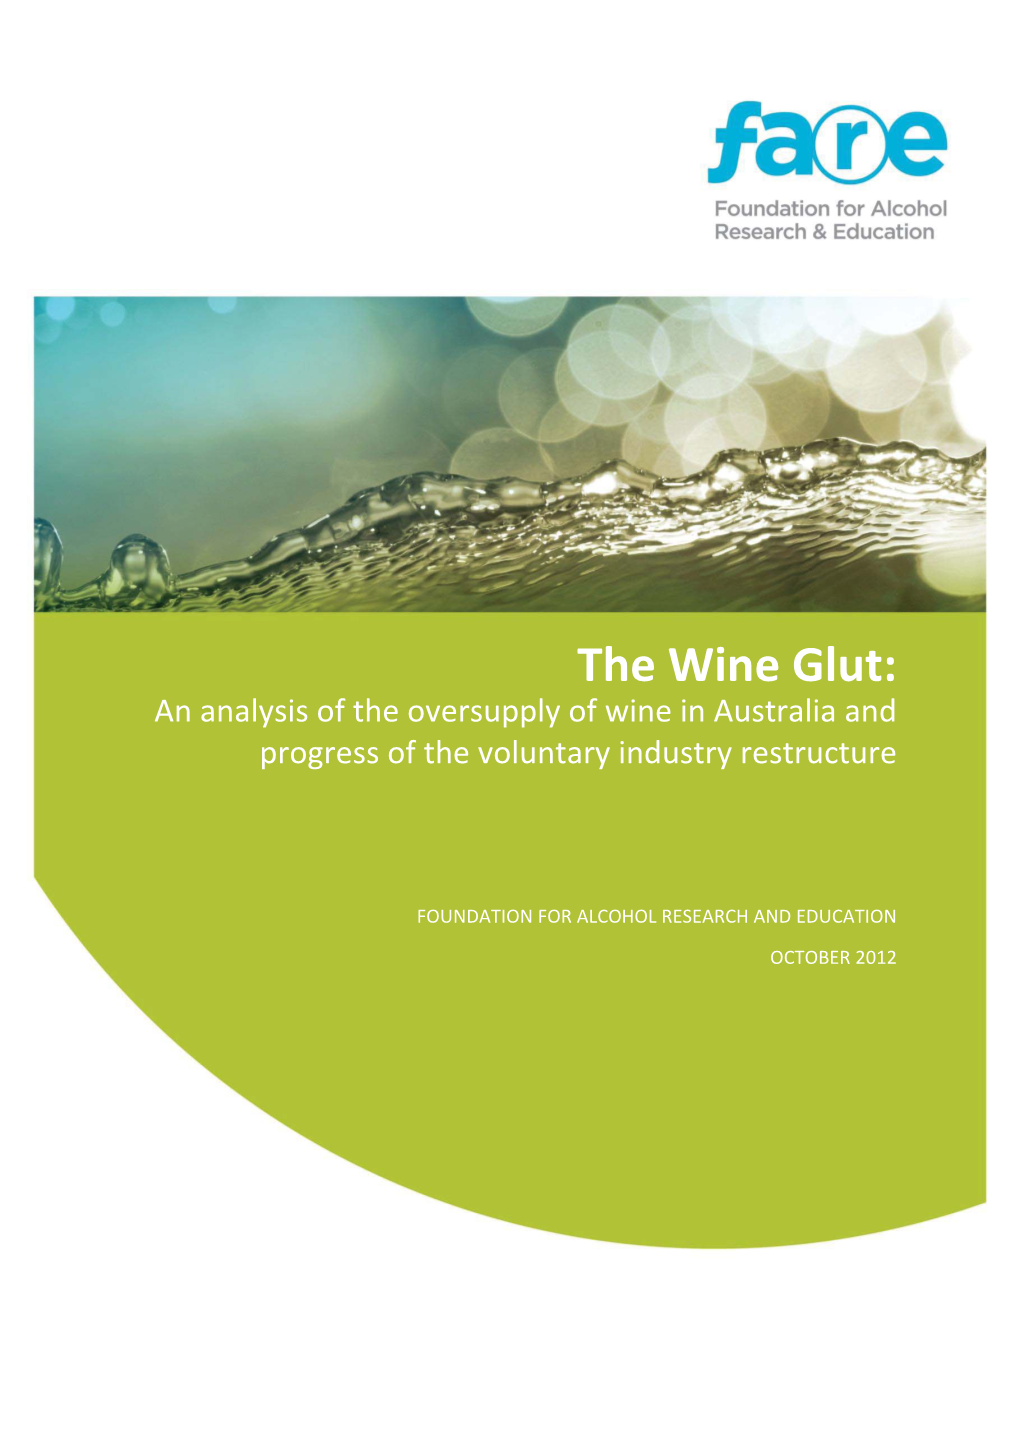 The Wine Glut: an Analysis of the Oversupply of Wine in Australia and Progress of the Voluntary Industry Restructure